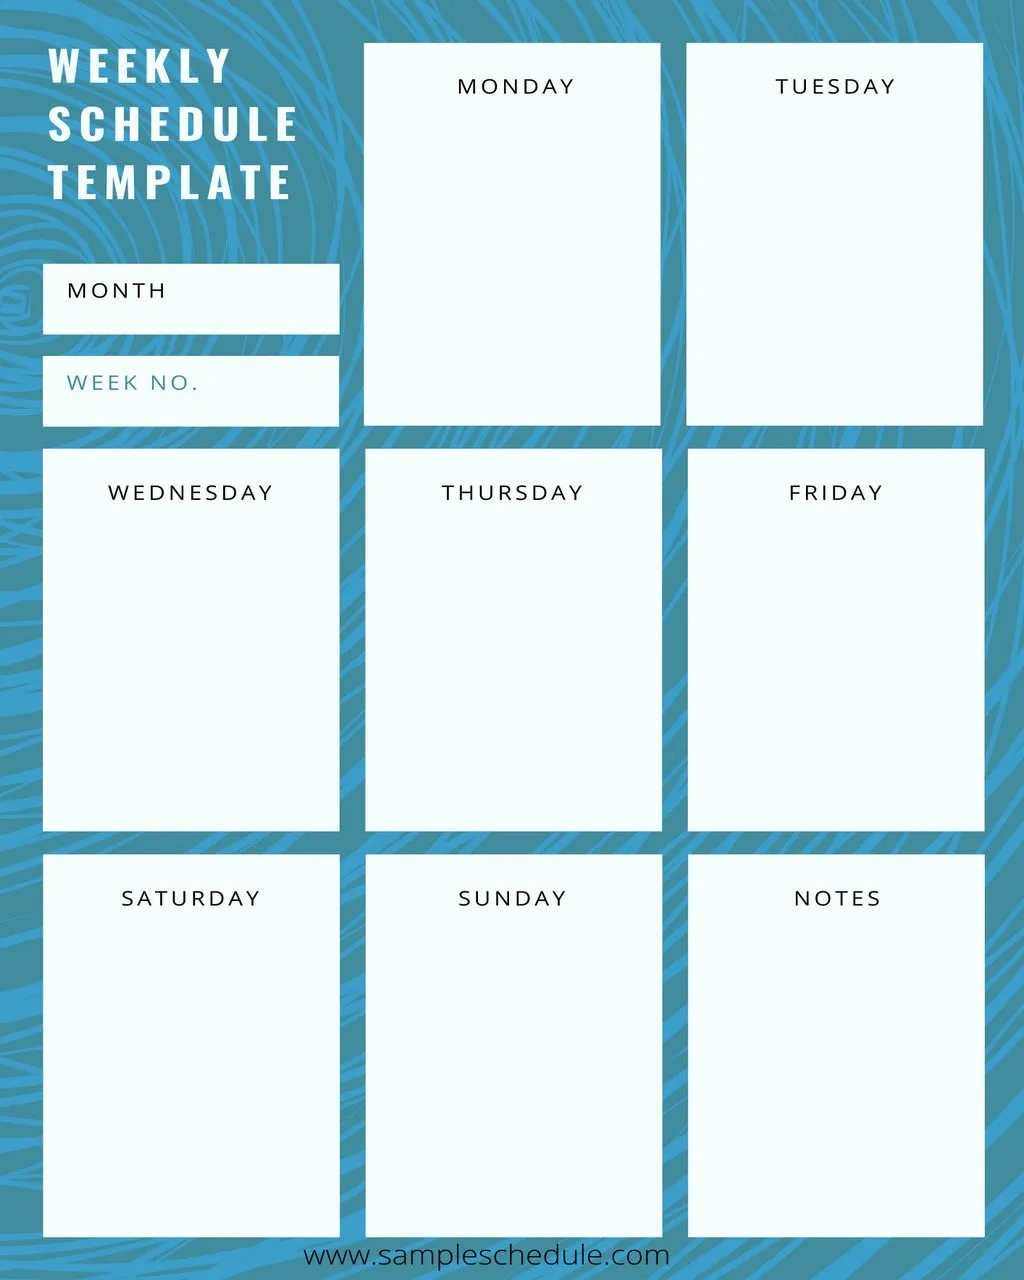 Weekly Schedule Template 08